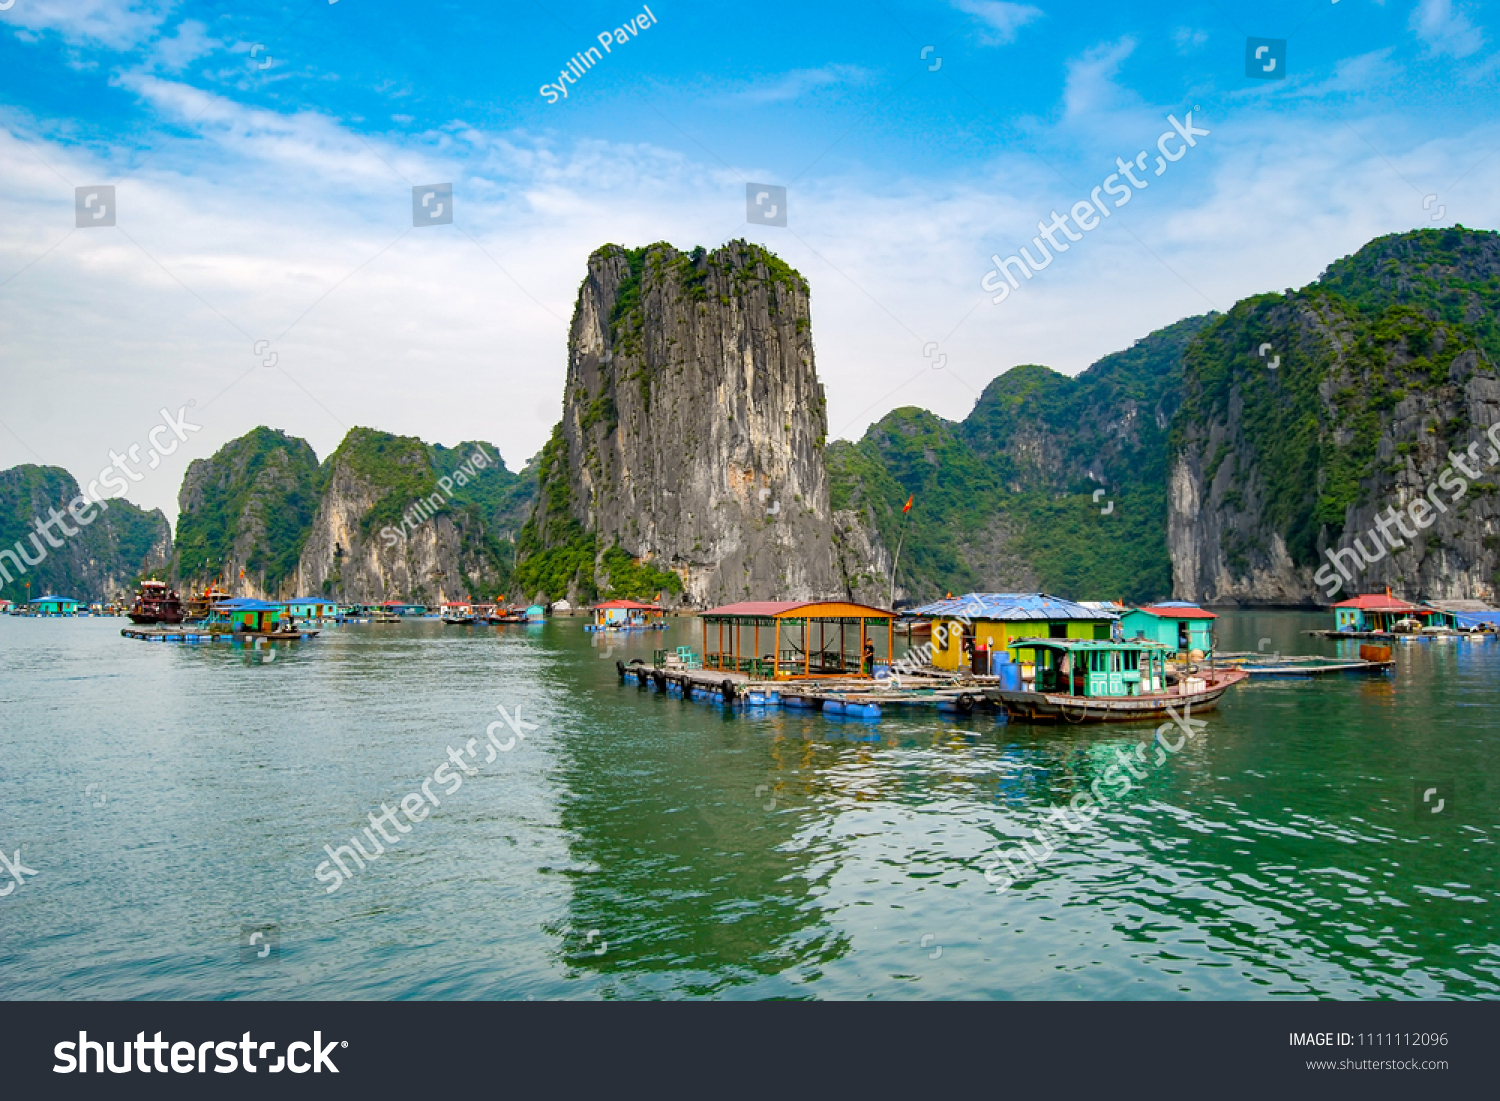 Fisherman's village standing on the water in Halong Bay. Vietnam #1111112096